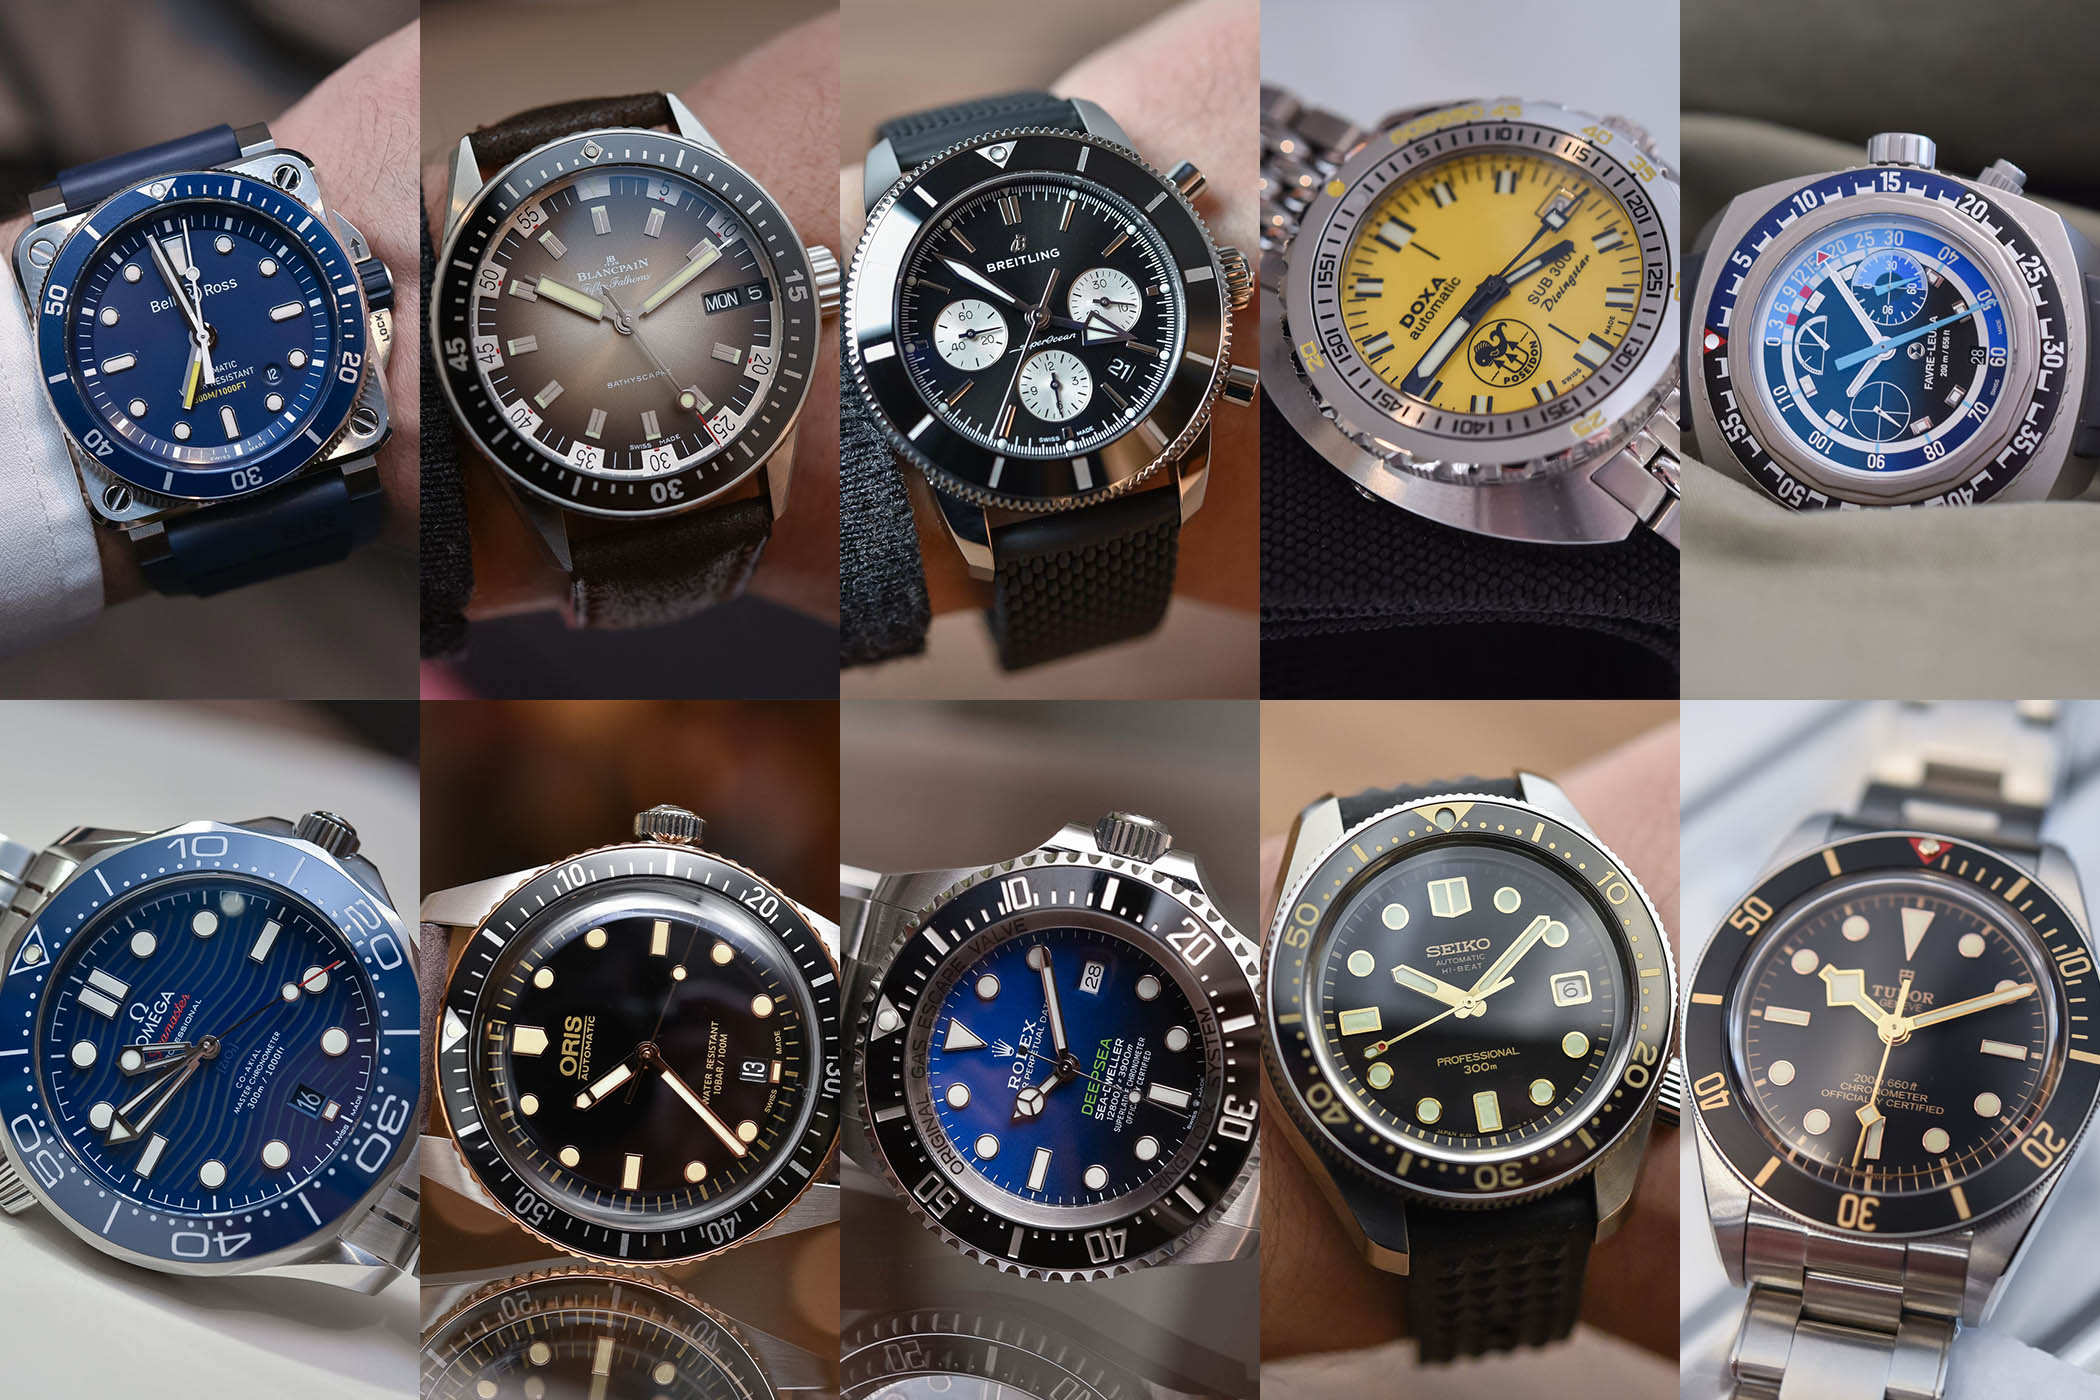 Diving Watches Durability and Design​